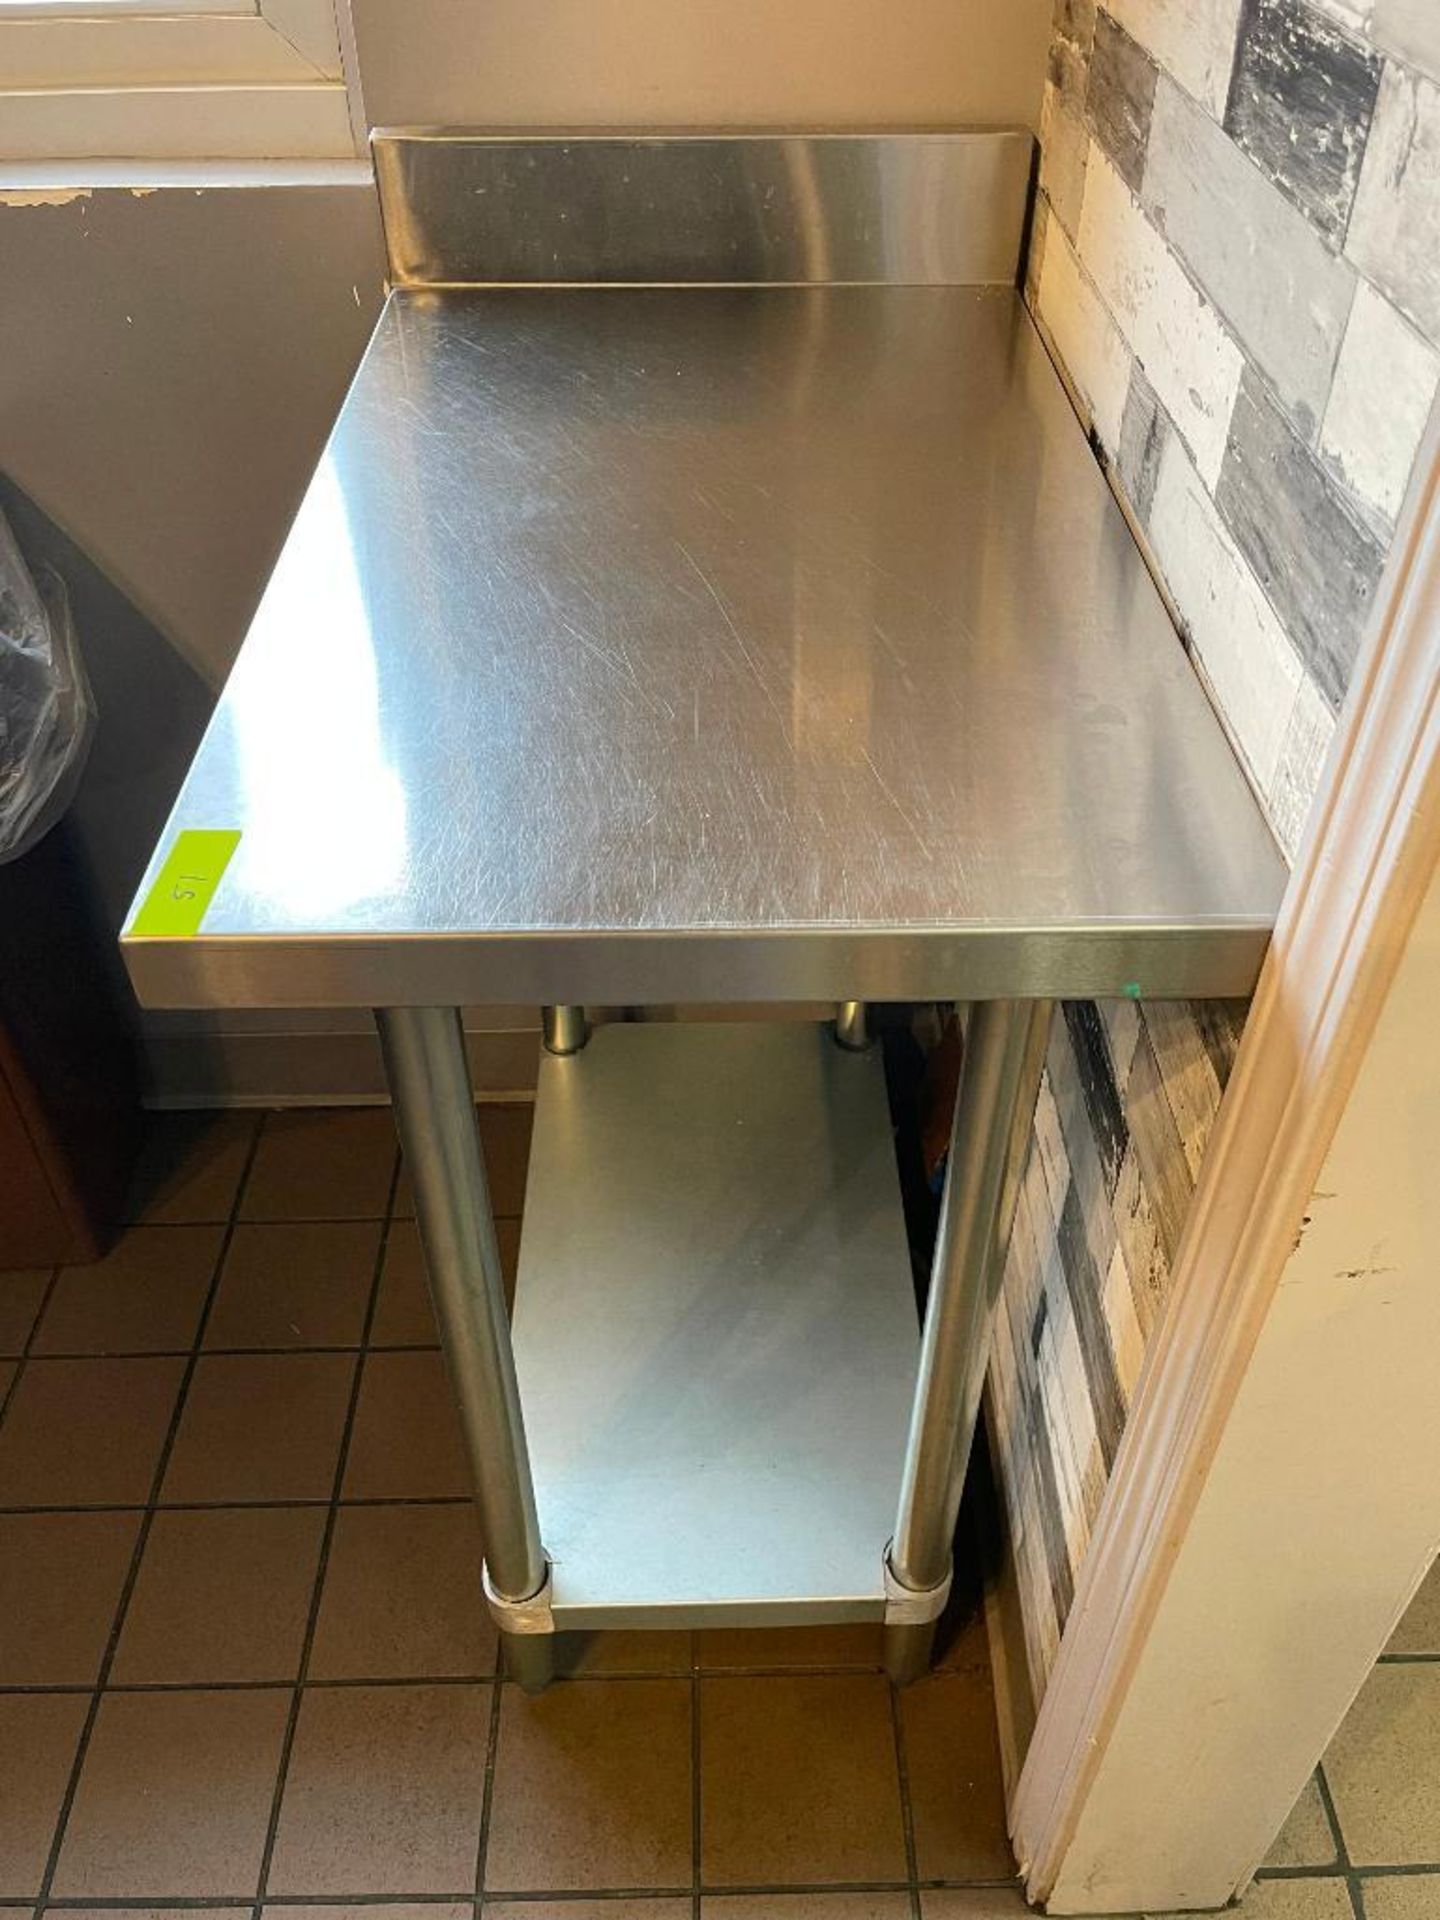 DESCRIPTION: 30" X 18" STAINLESS TABLE W/ 4" BACK SPLASH SIZE 30" X 18" LOCATION: COUNTER QTY: 1